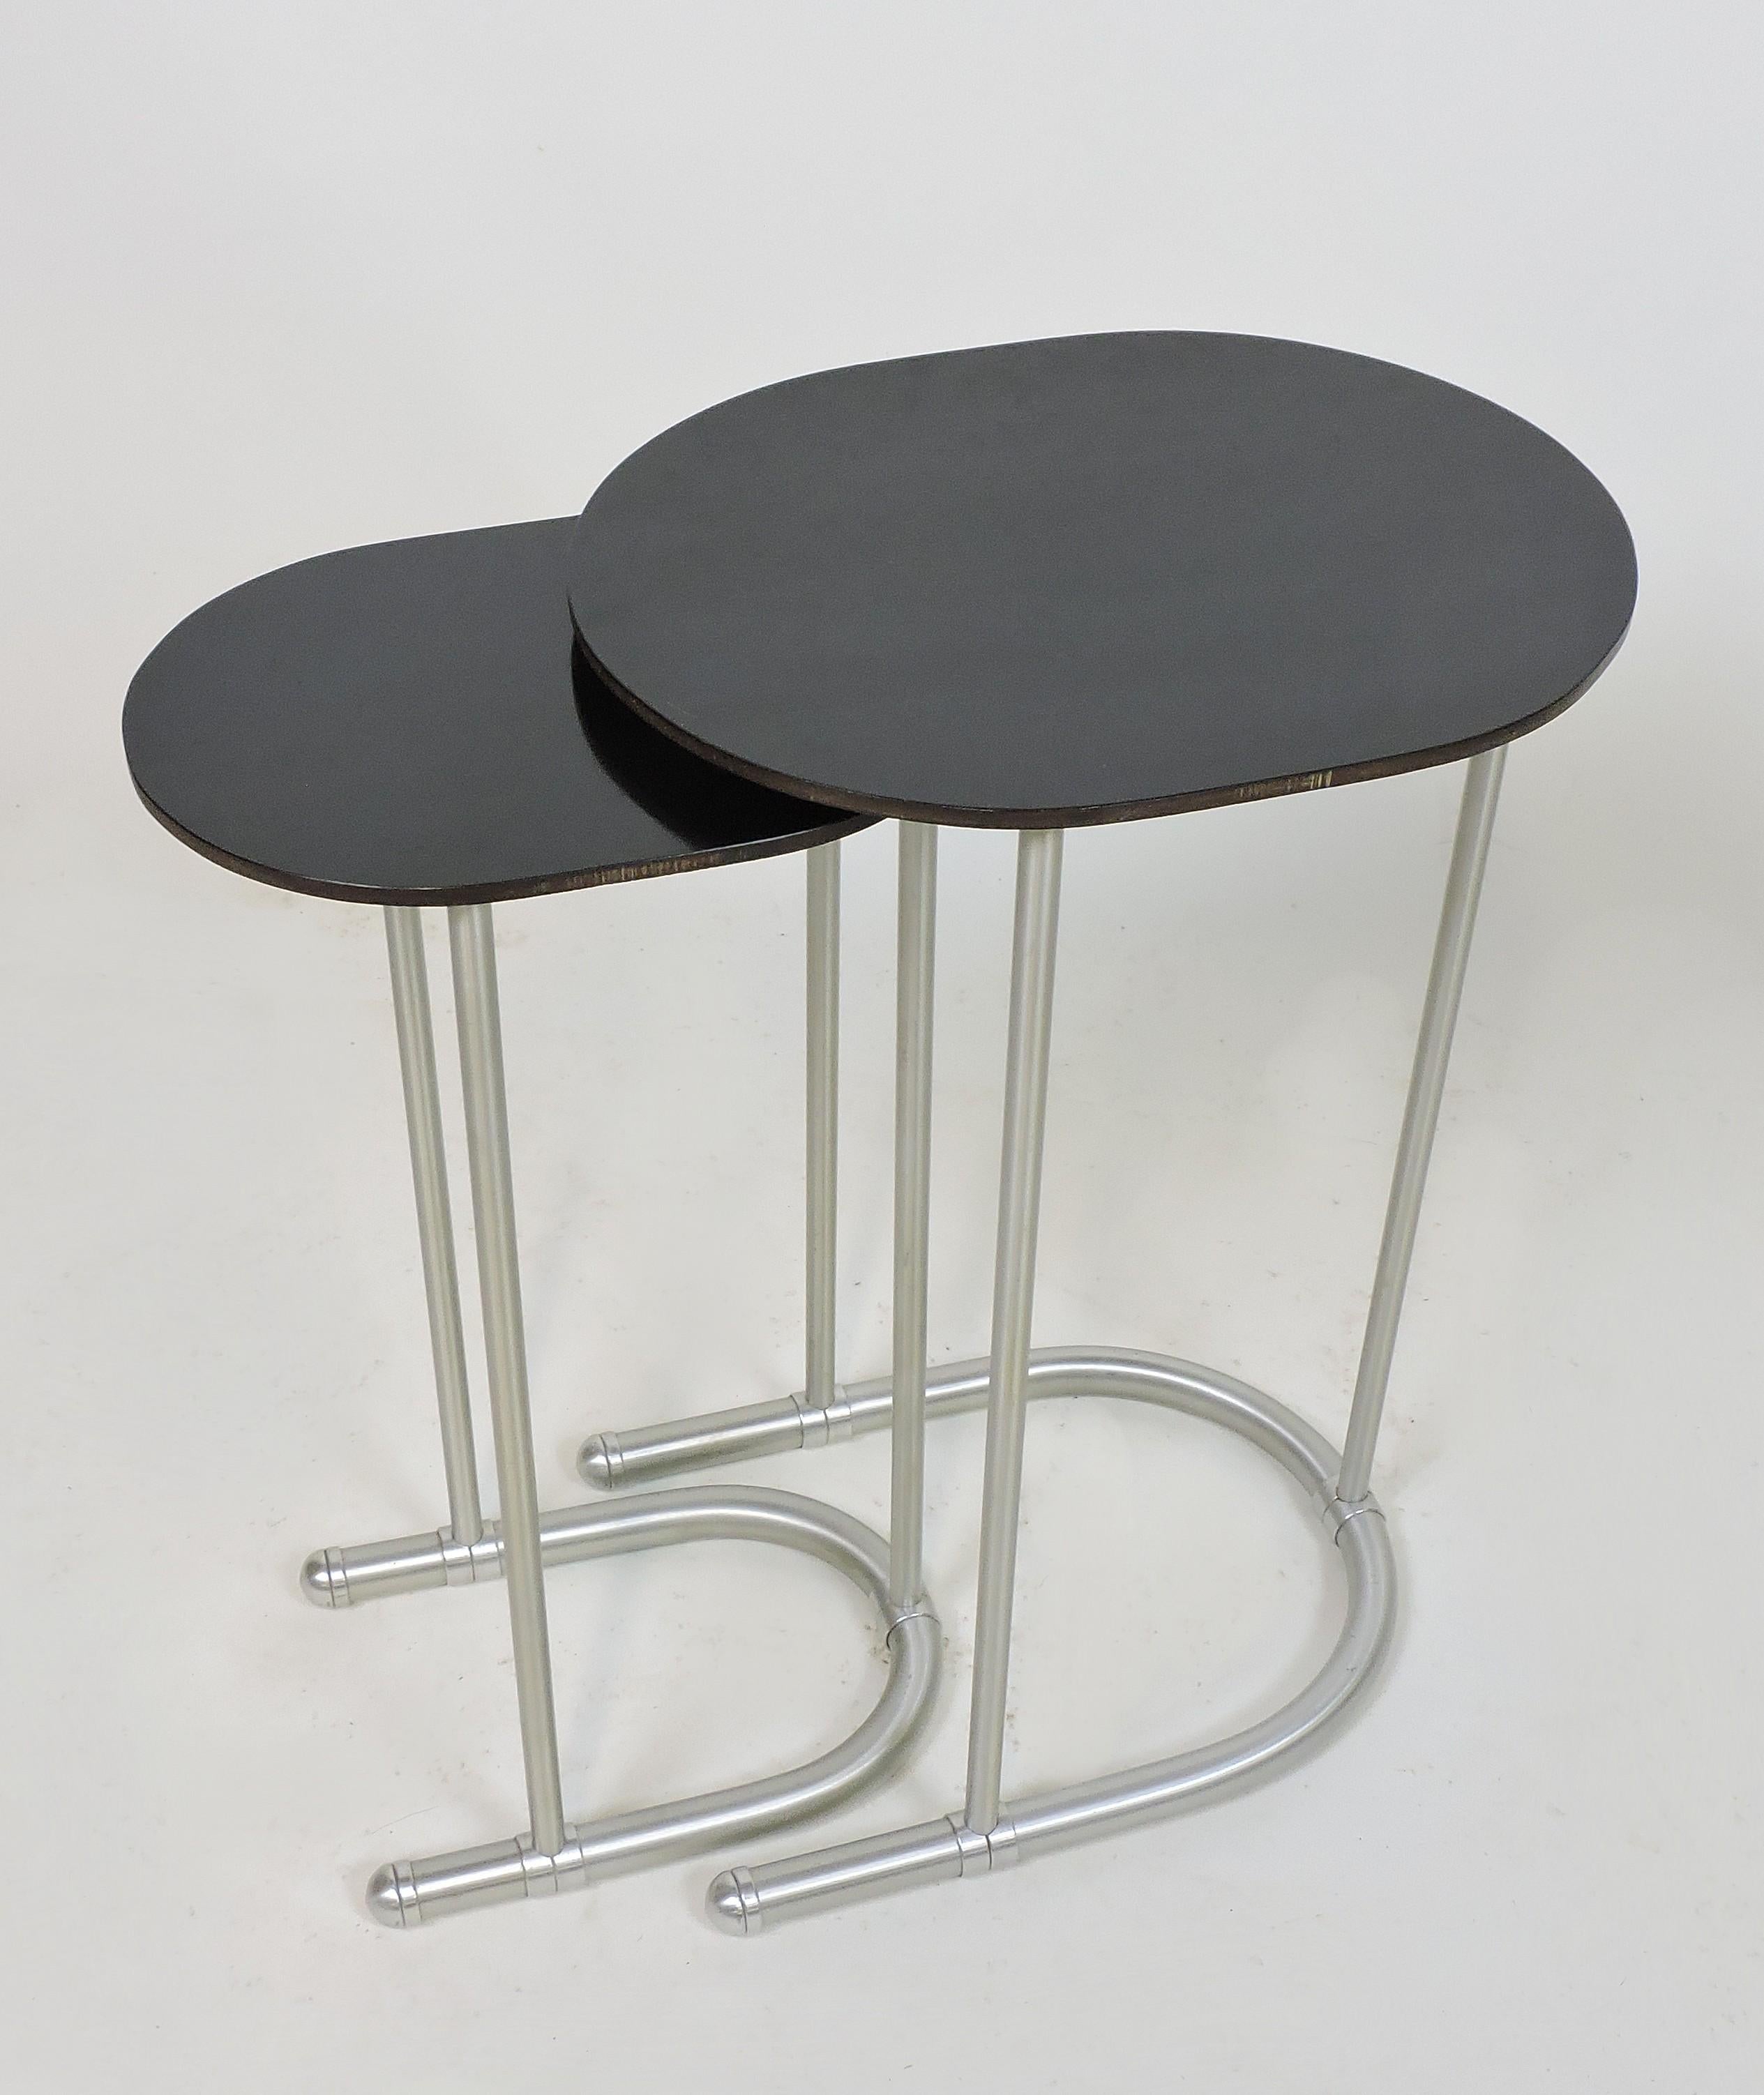 Elegant set of two nesting tables with black laminate tops and aluminum bases designed by Warren McAthur and manufactured in the 1930s. The larger size is 20